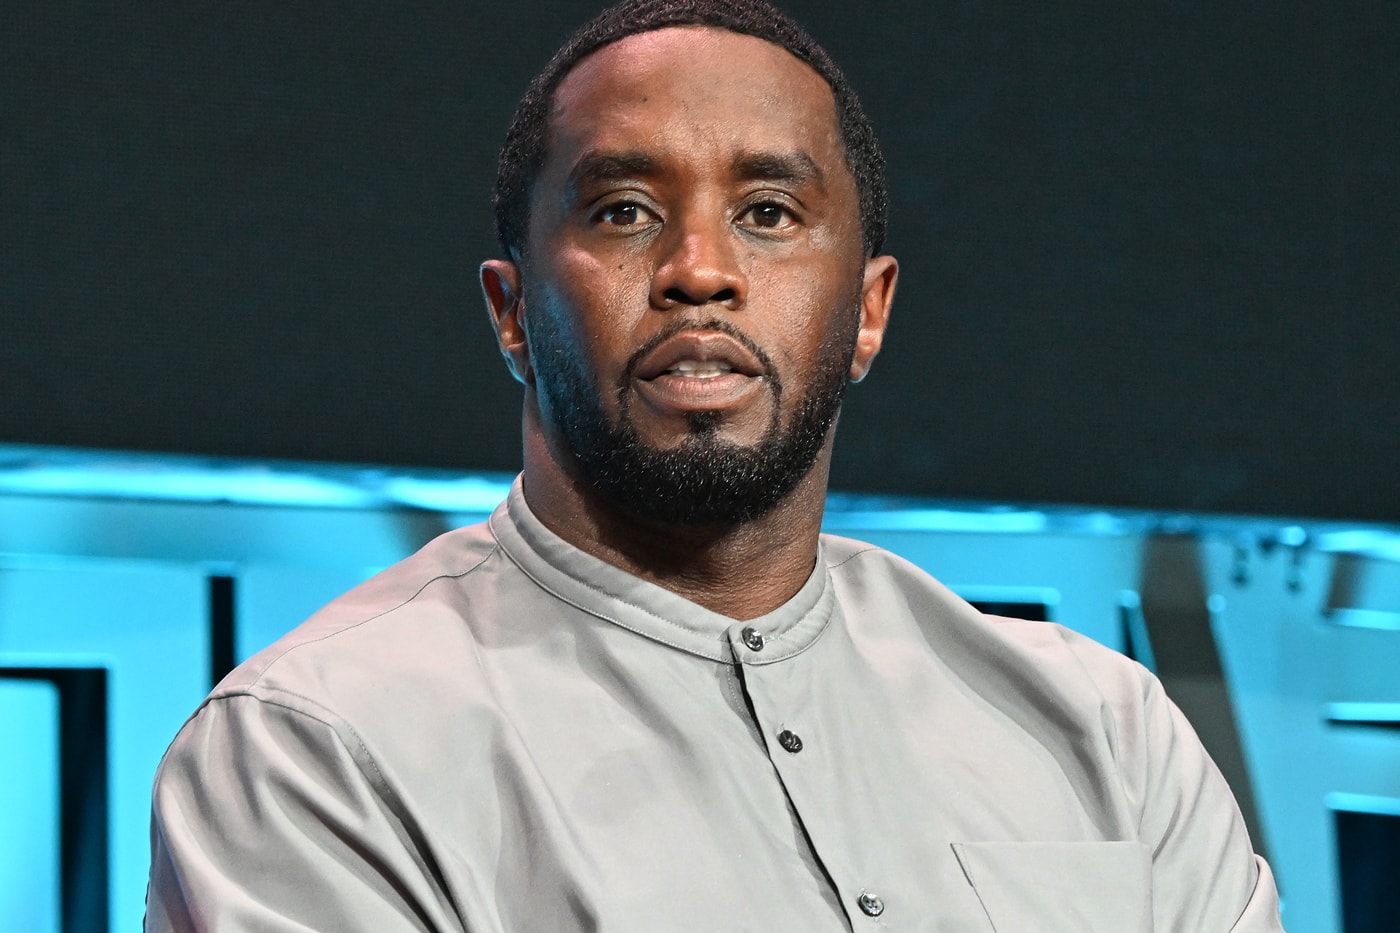 Diddy's Miami and LA Properties Raided by Homeland Security as Part of Sex Trafficking Investigation sean combs federal law investment multiple sexual misconduct claims justin king 